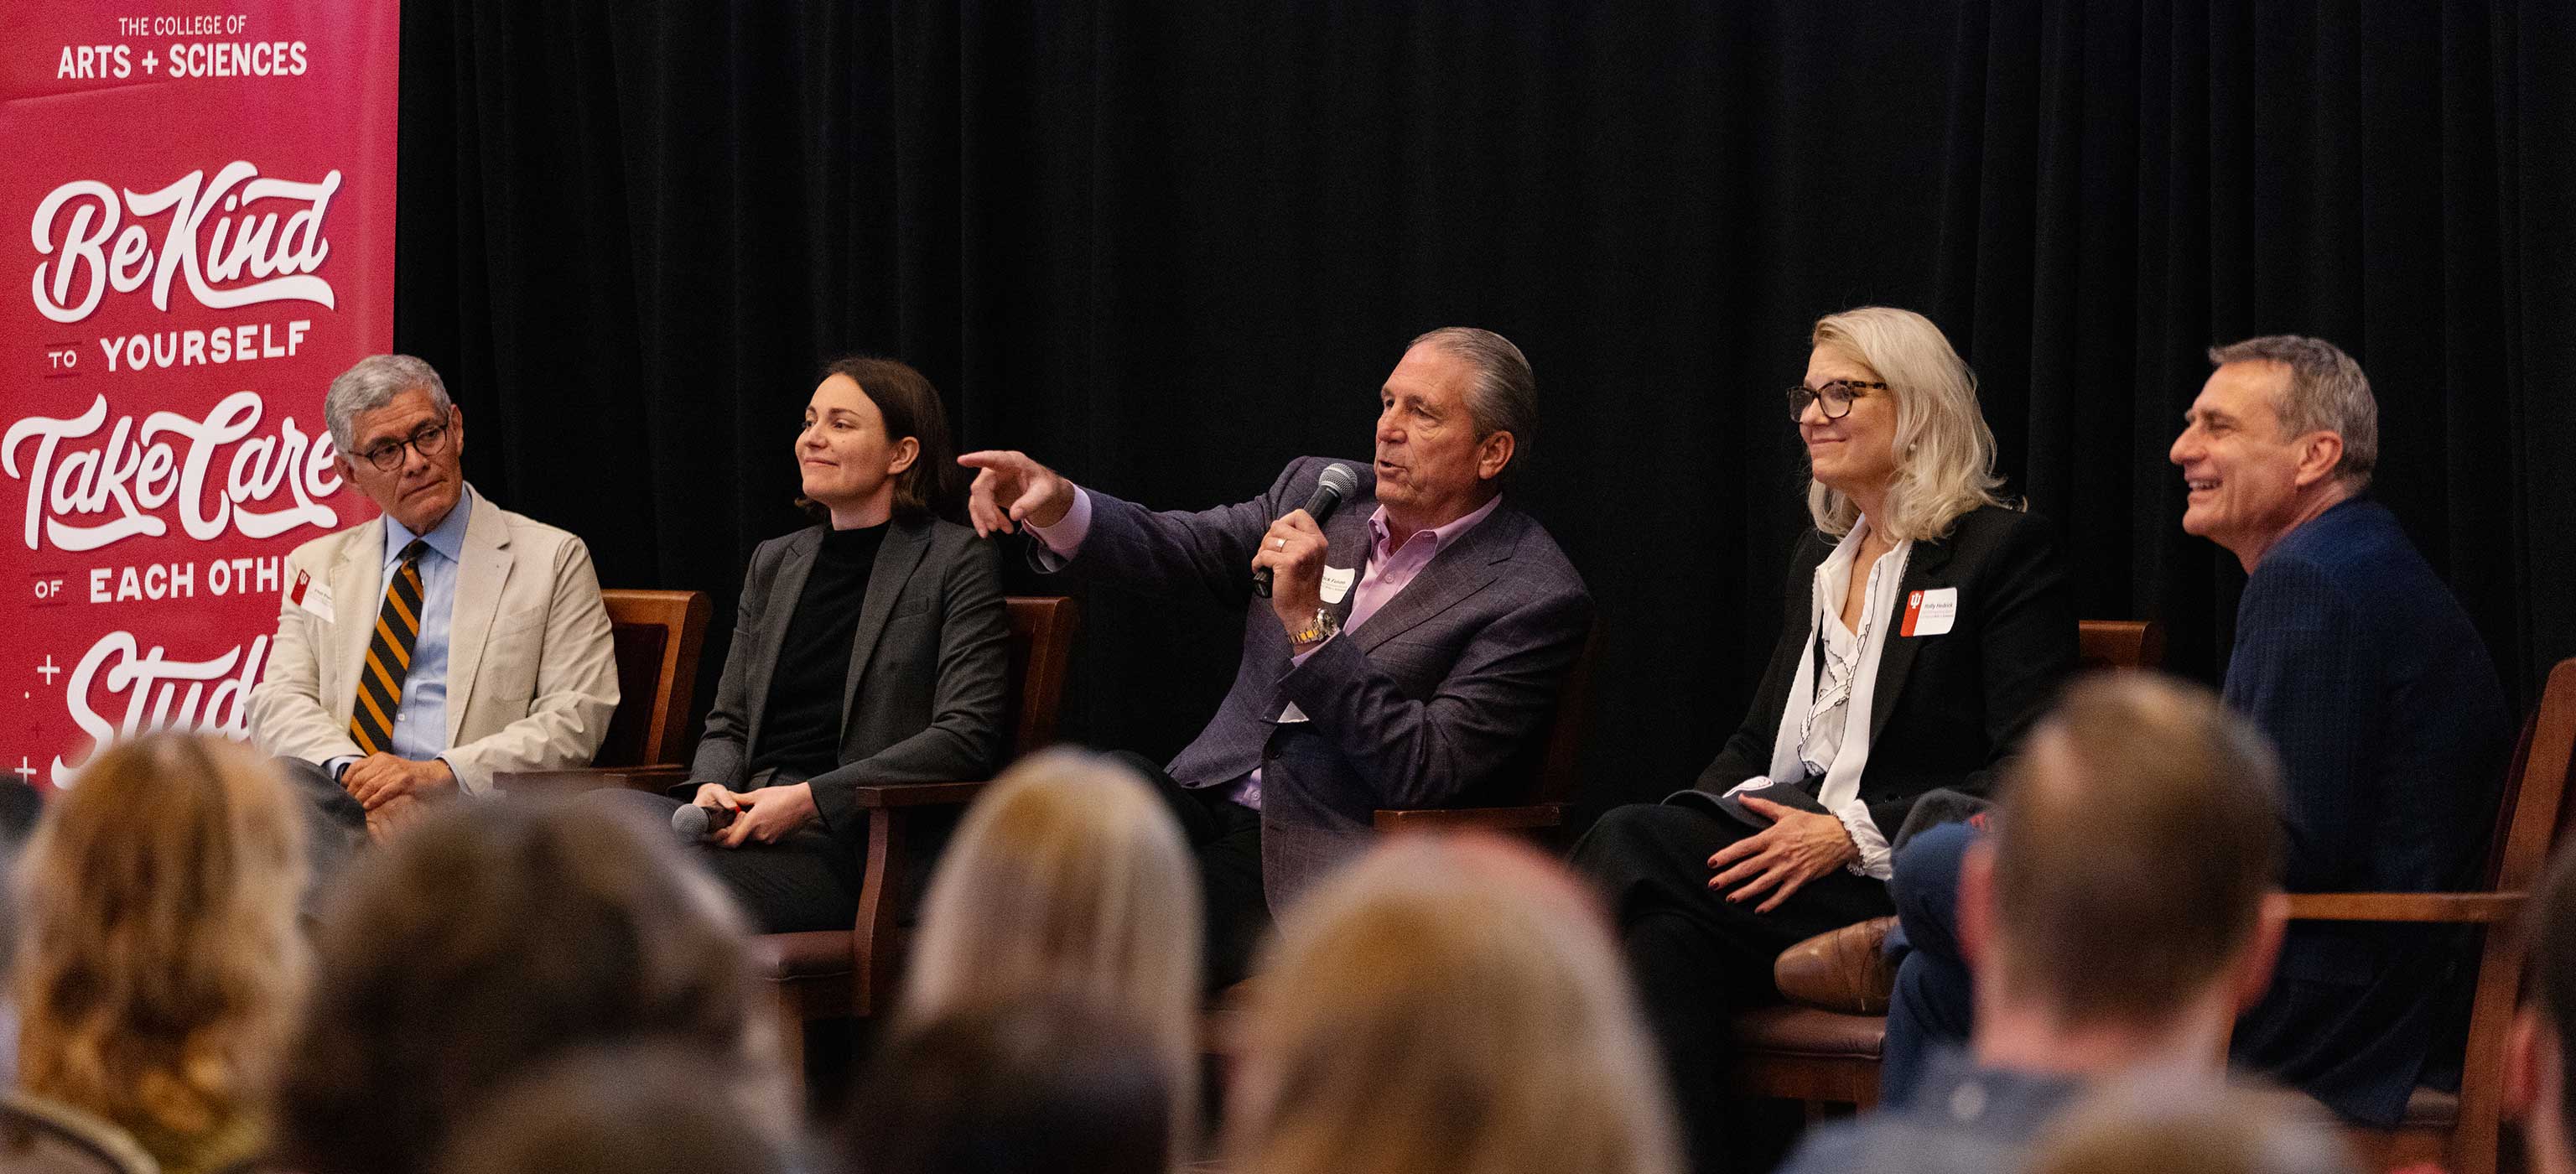 The 2023 alumni award recipients and executive dean Rick Van Kooten talk on stage during a panel discussion in the Indiana Memorial Union's Alumni Hall.